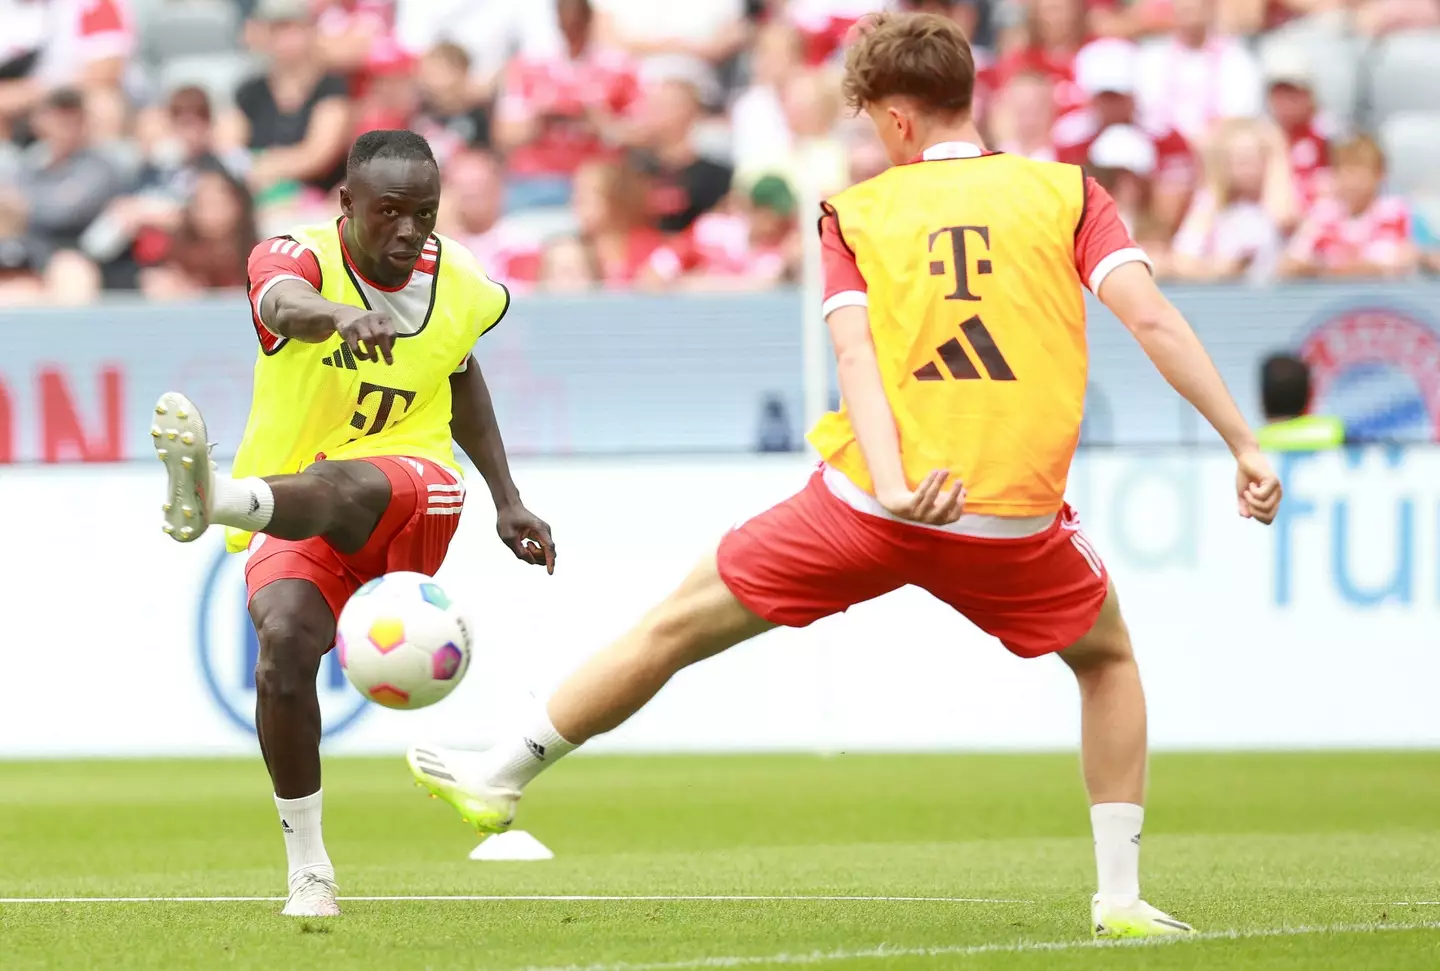 Sadio Mane (left) is set to move on to pastures new following an unsuccessful stint at Bayern Munich. (